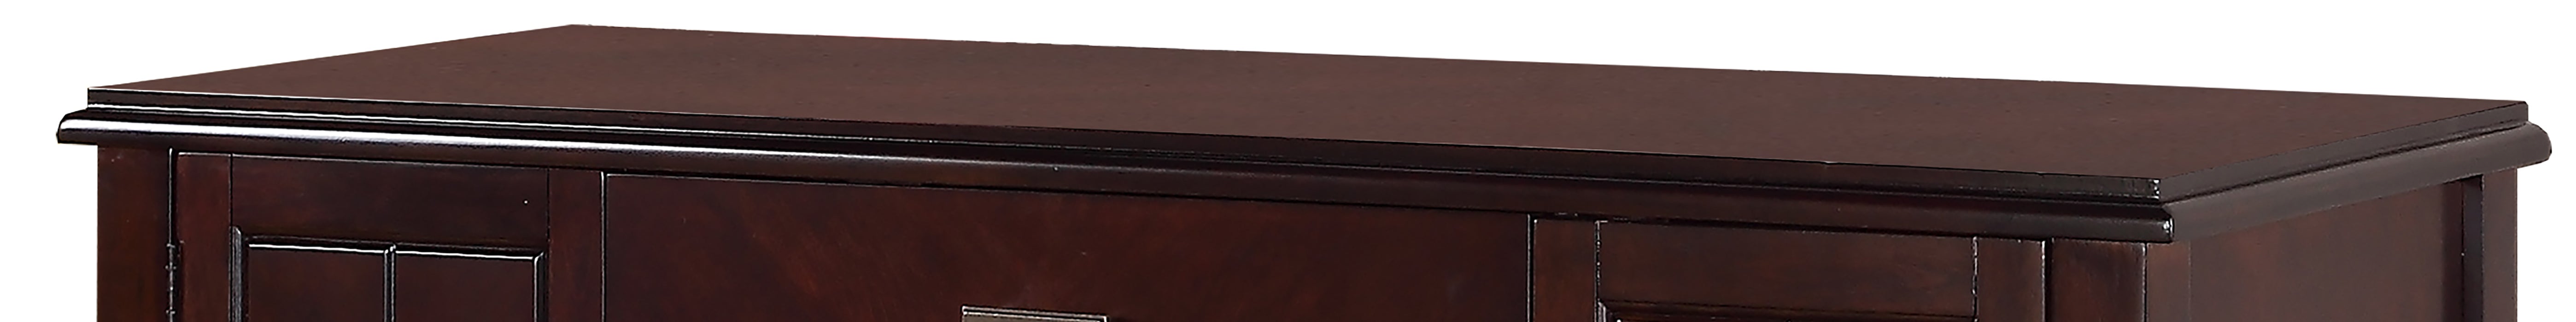 Era Transitional Style Dining Server in Espresso finish Wood